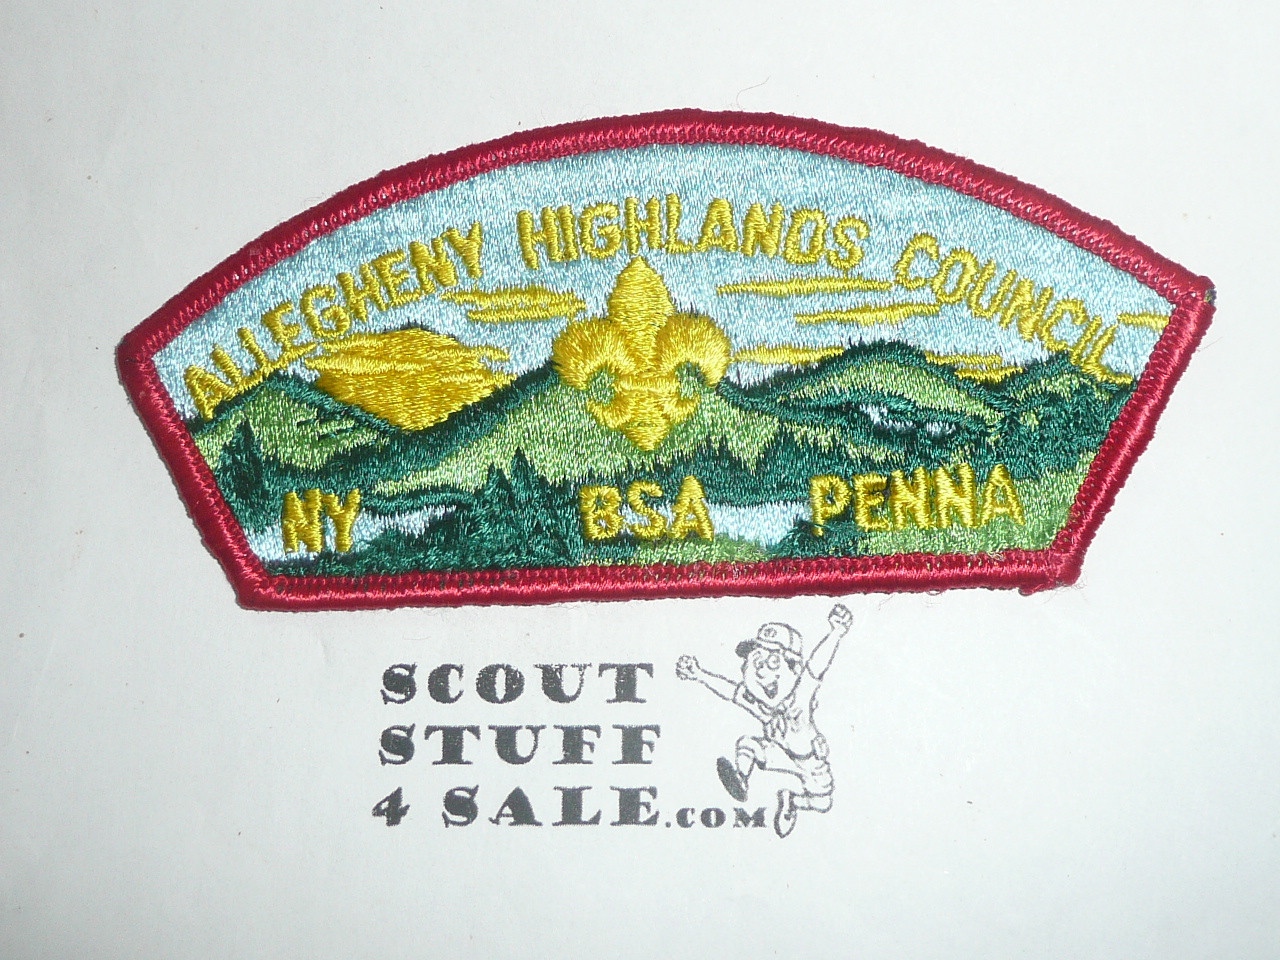 Allegheny Highlands Council s1 CSP - Scout